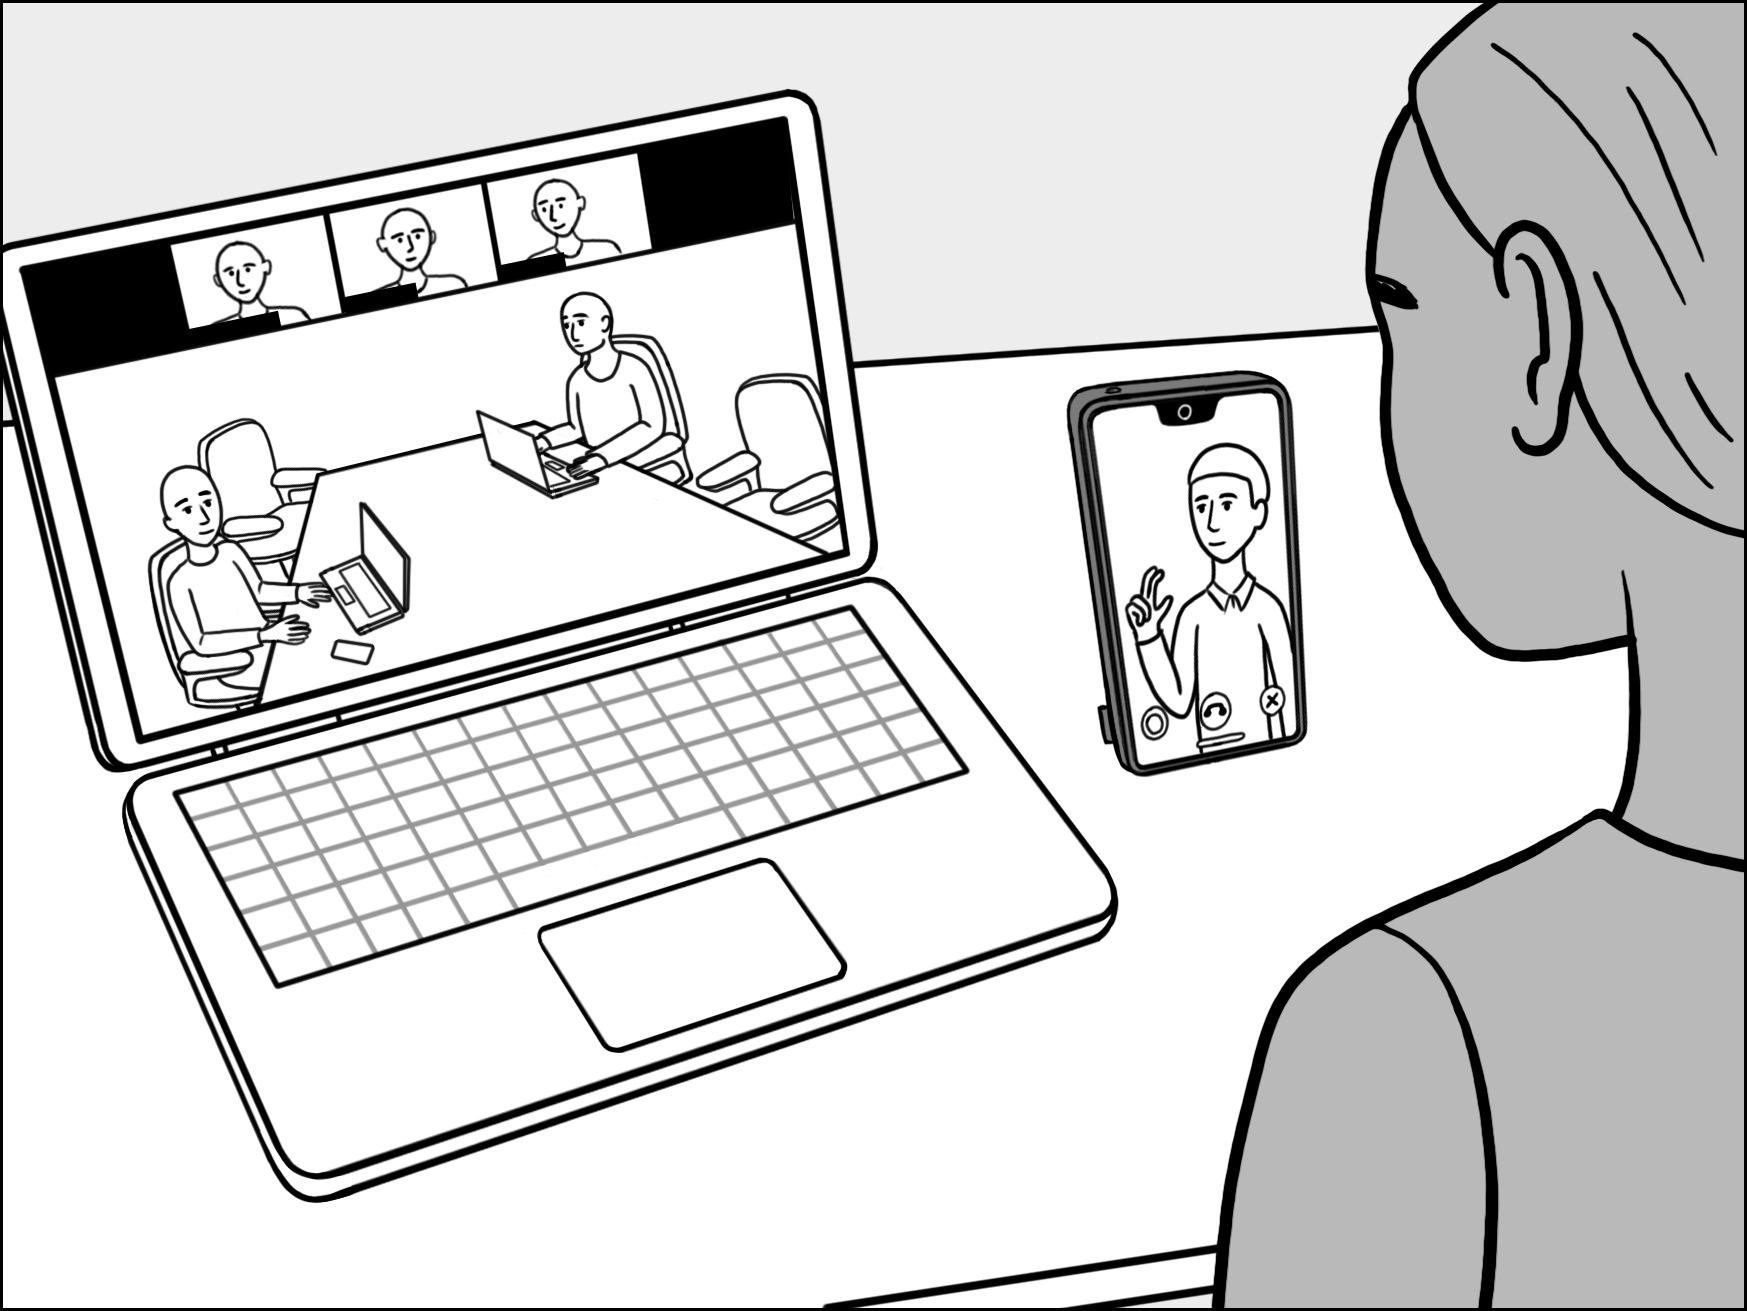 Illustration of Deaf ASL user that has a laptop and a mobile device setup. On the laptop, there is a video conferencing interface that shows the video grid of in-person attendees and three other remote attendees. Also, there is a mobile device, standing upright, with a video image of an ASL interpreter.